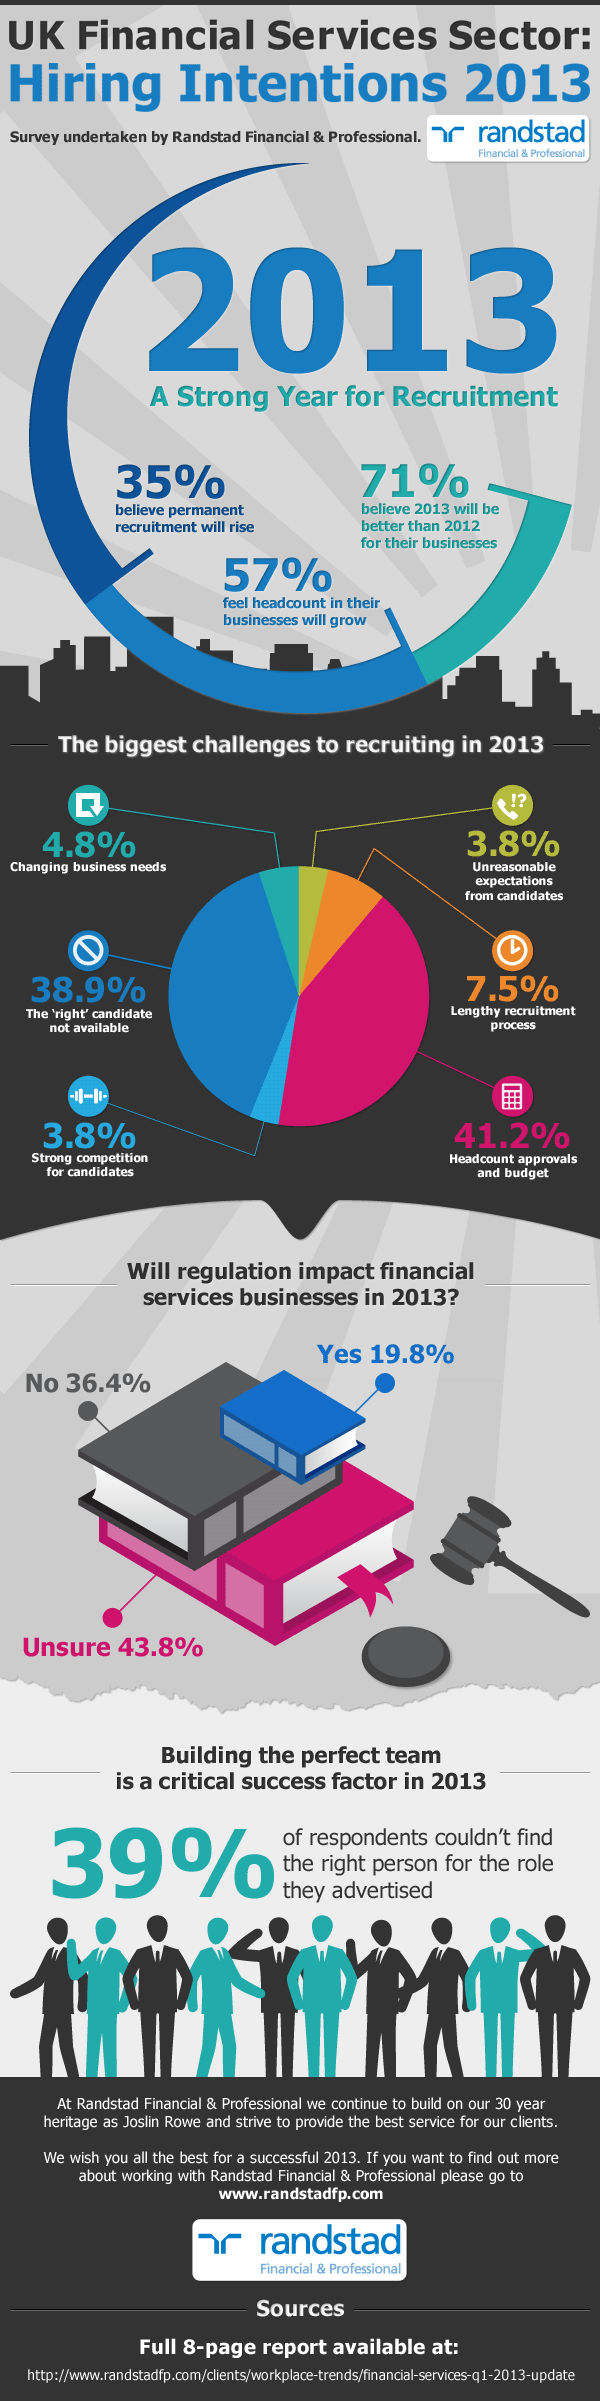 UK Financial Services Hiring Intentions 2013 Infographic